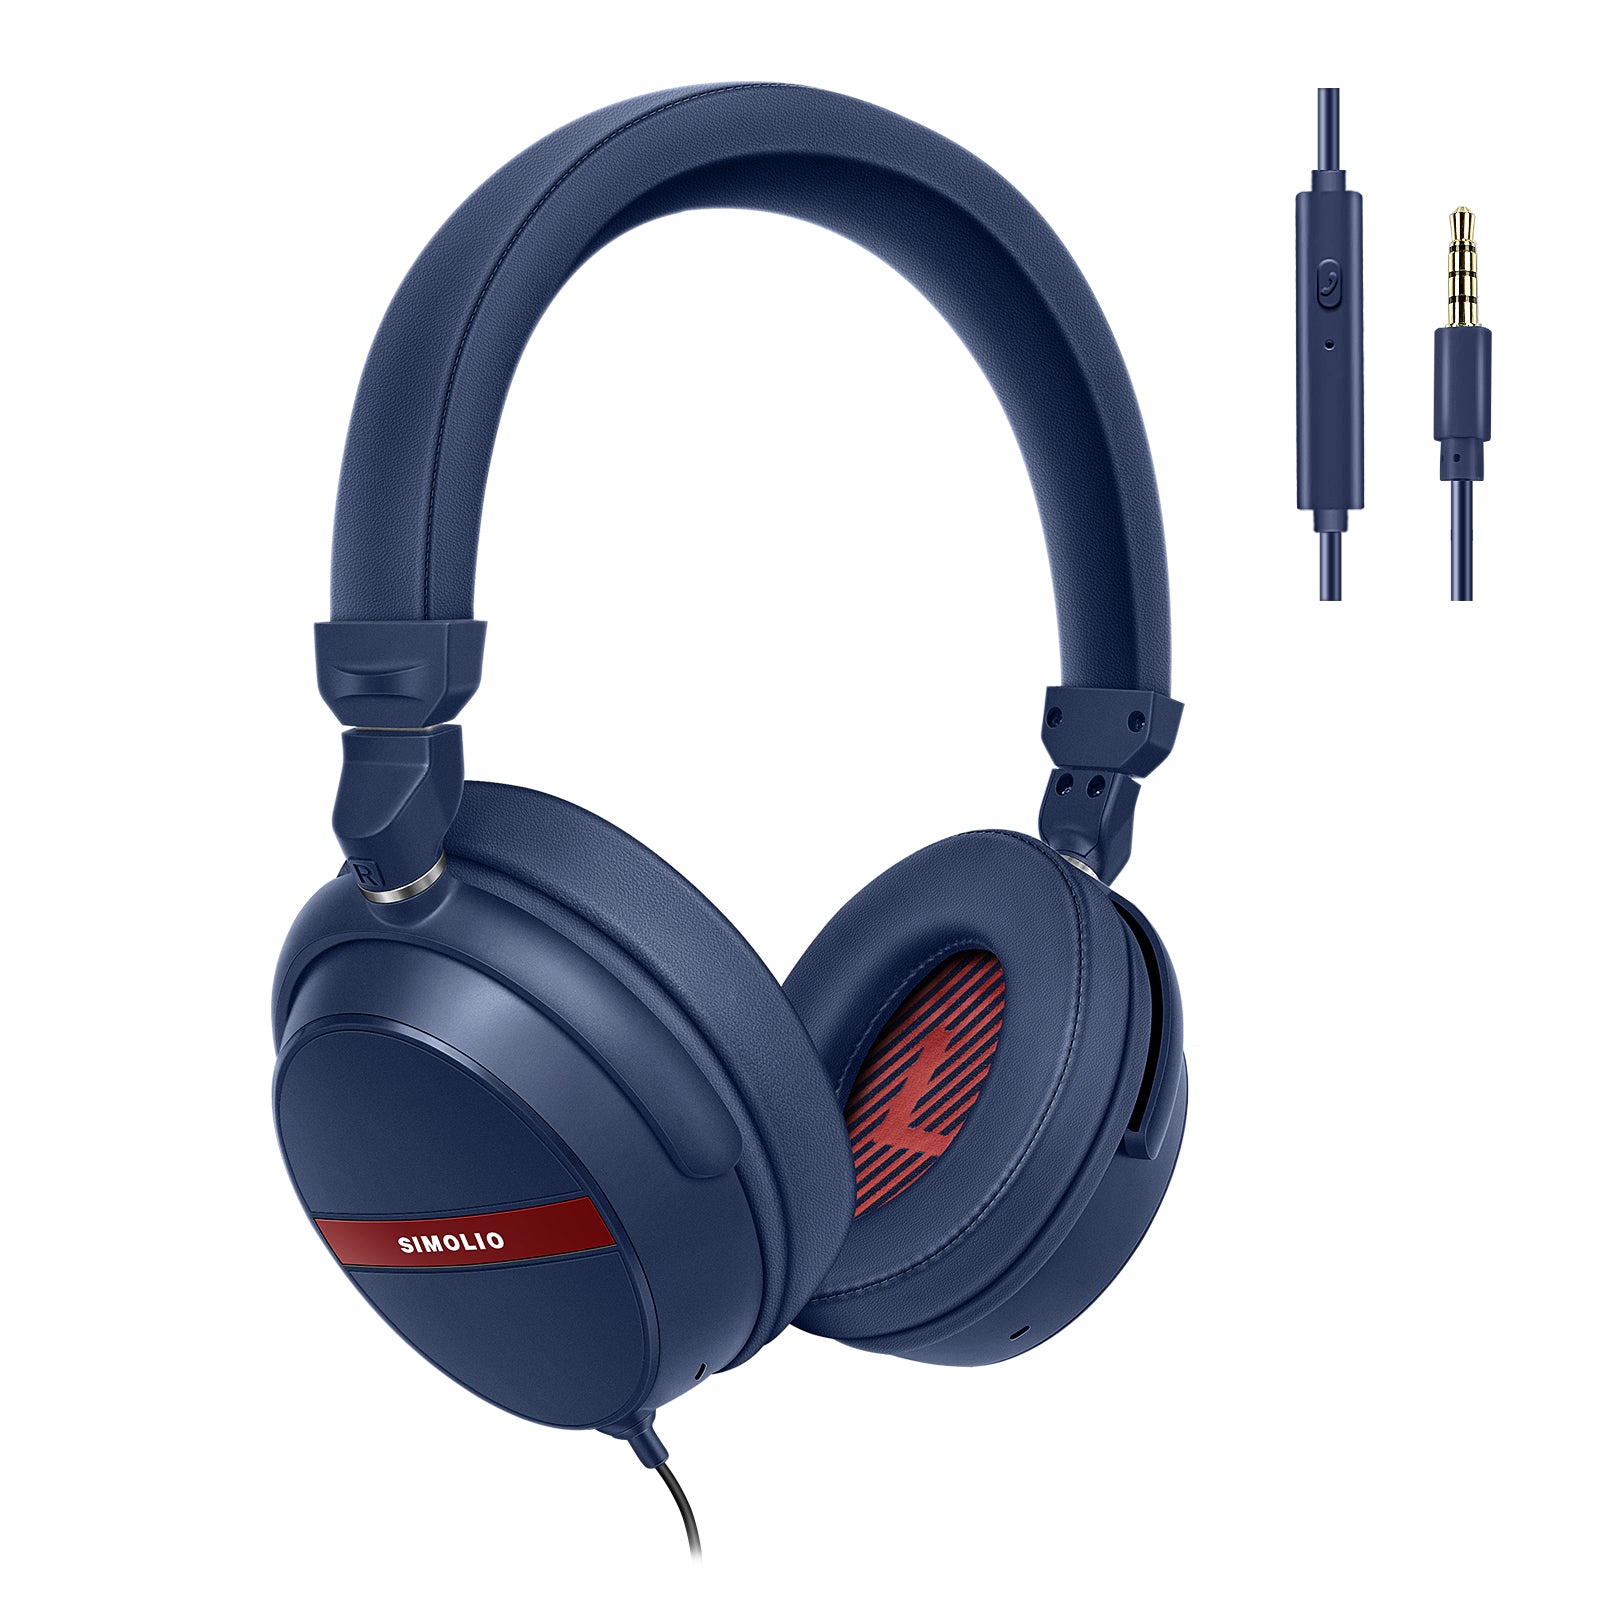 Simolio 906M stereo wired over ear headphones mic volume control blue